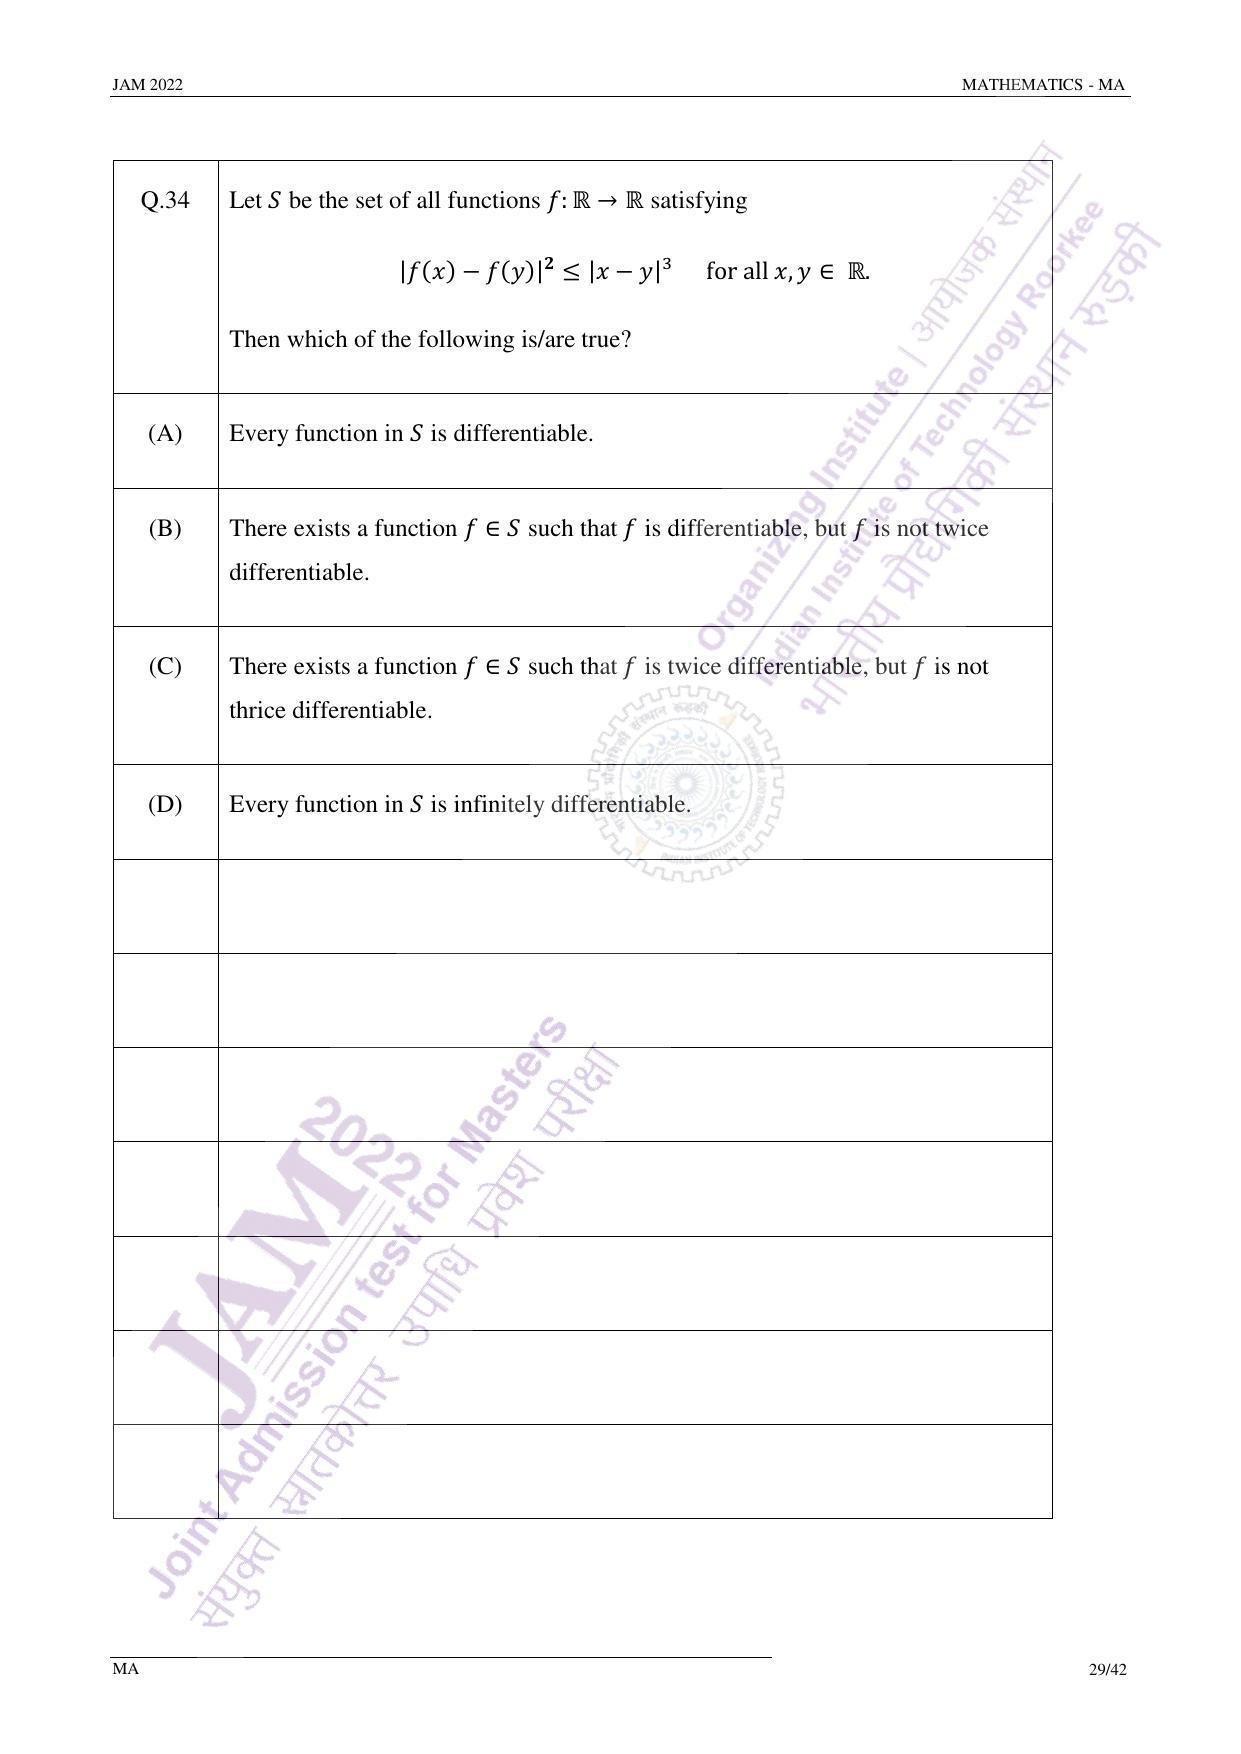 JAM 2022: MA Question Paper - Page 29